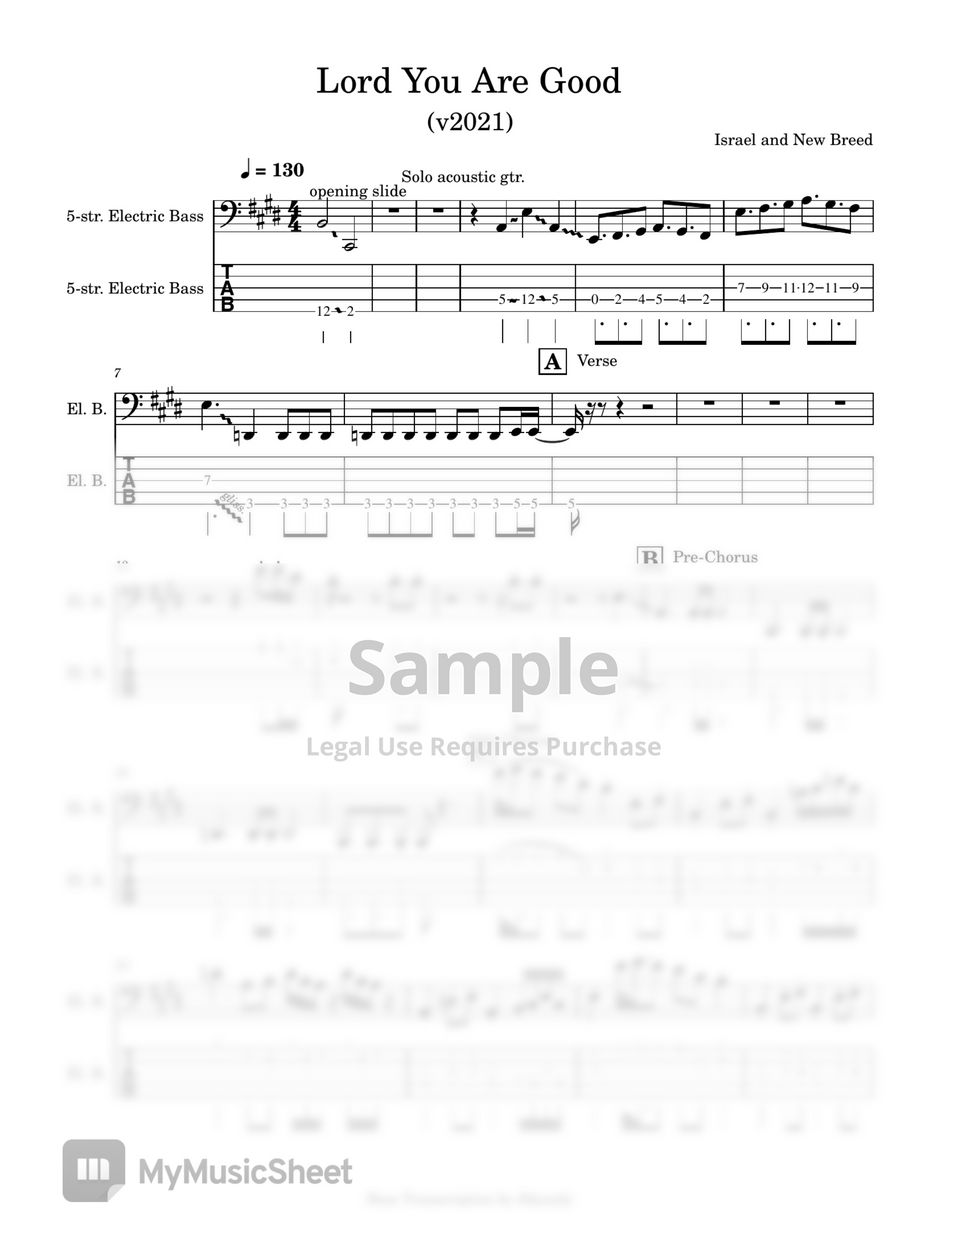 Israel & New Breed - Lord You Are Good (Version 2021) (Bass Music Sheet with Full Tabs) by Israel & New Breed